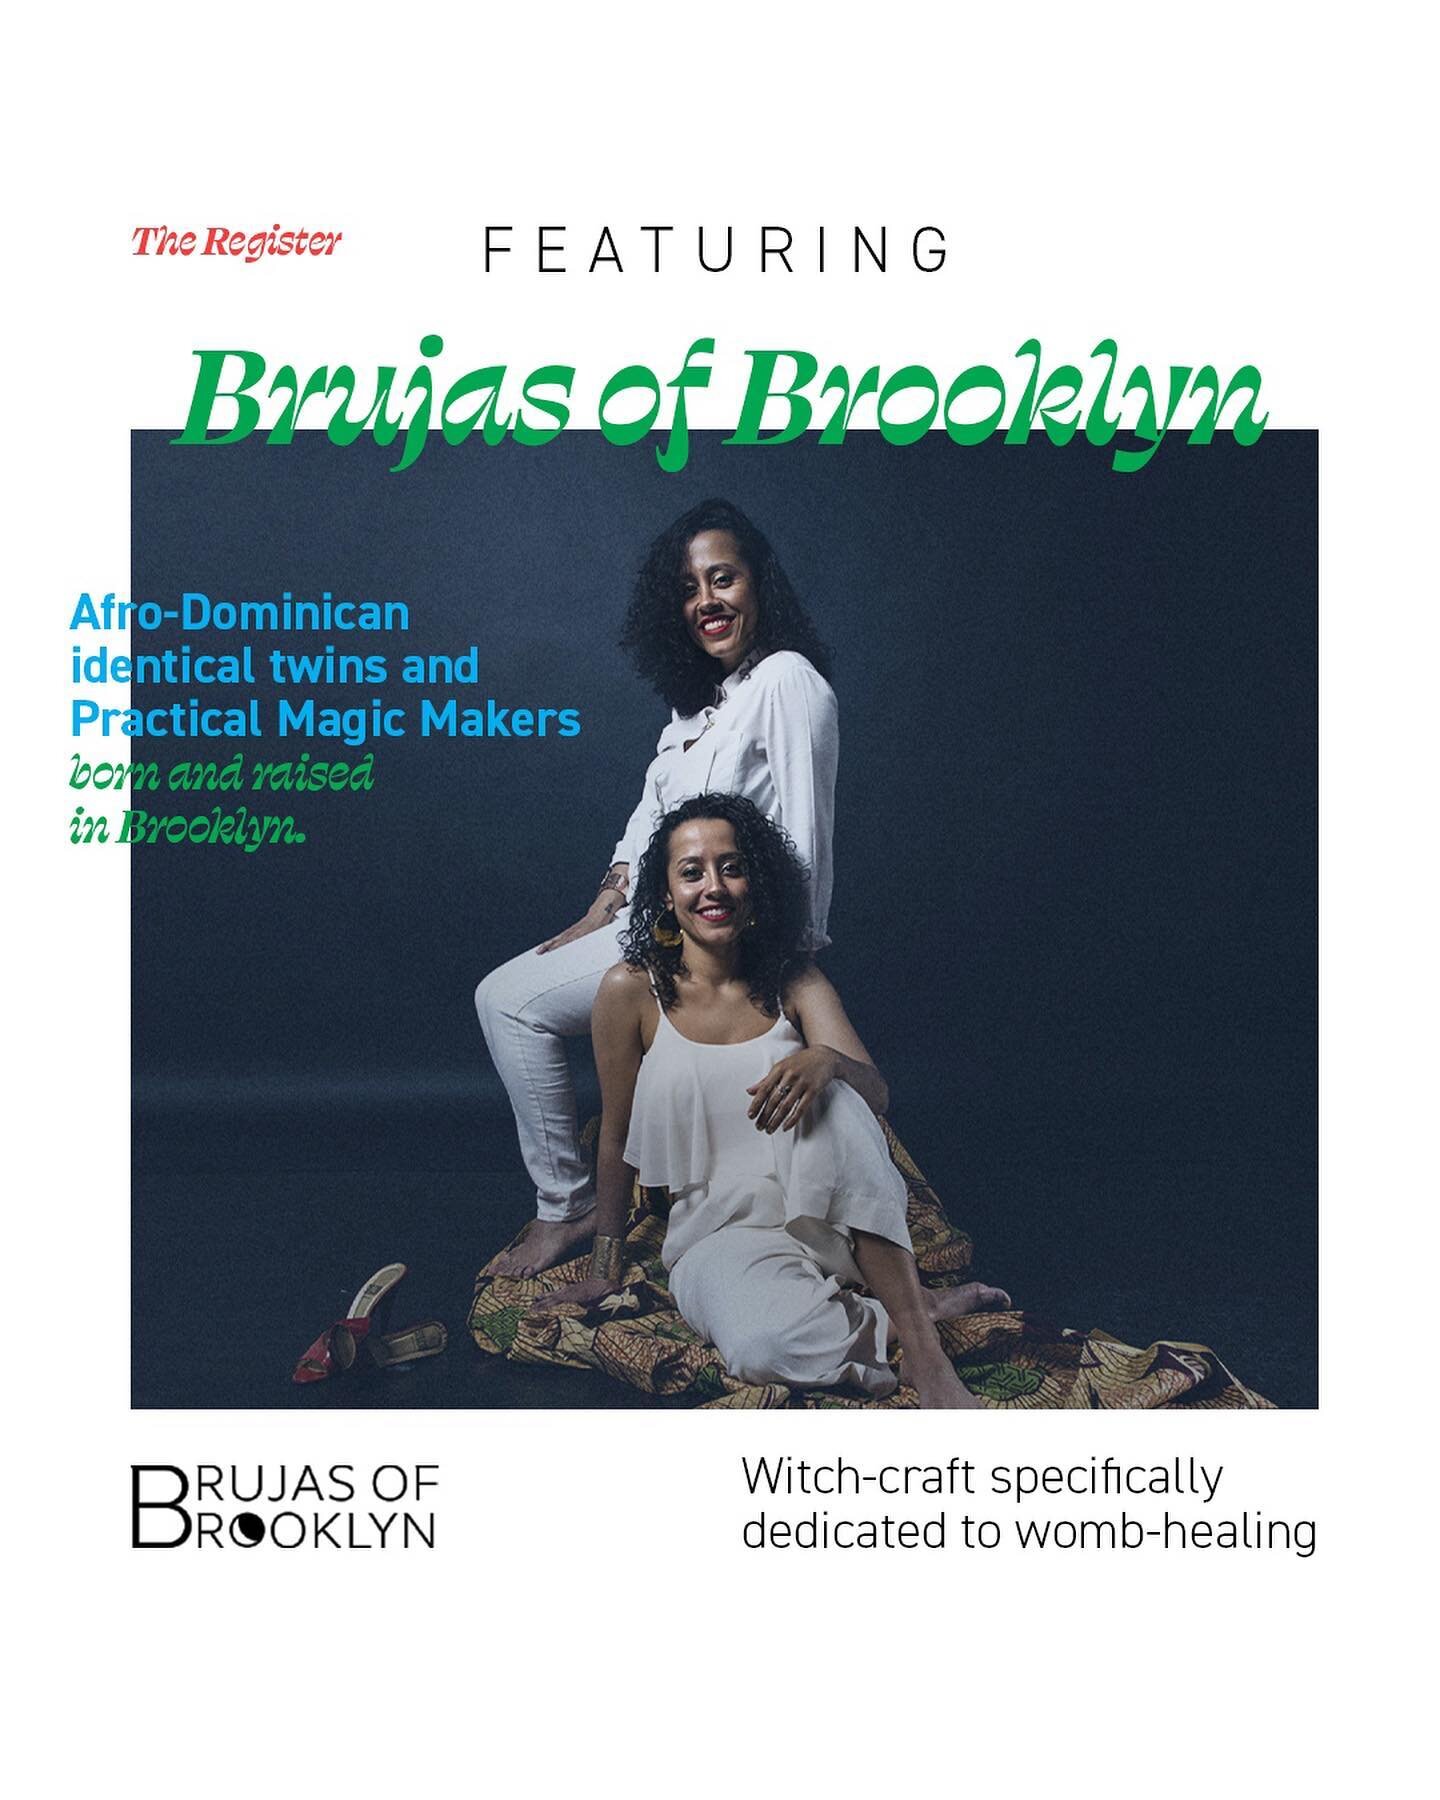 Meet las Afro-Dominicana Twitches born and raised in Brooklyn ✨

These mujeres are the True Witch Doctors! They believe in the power of spirit to cast spells that aid in collective healing. Their craft is specifically  dedicated to womb-healing and c